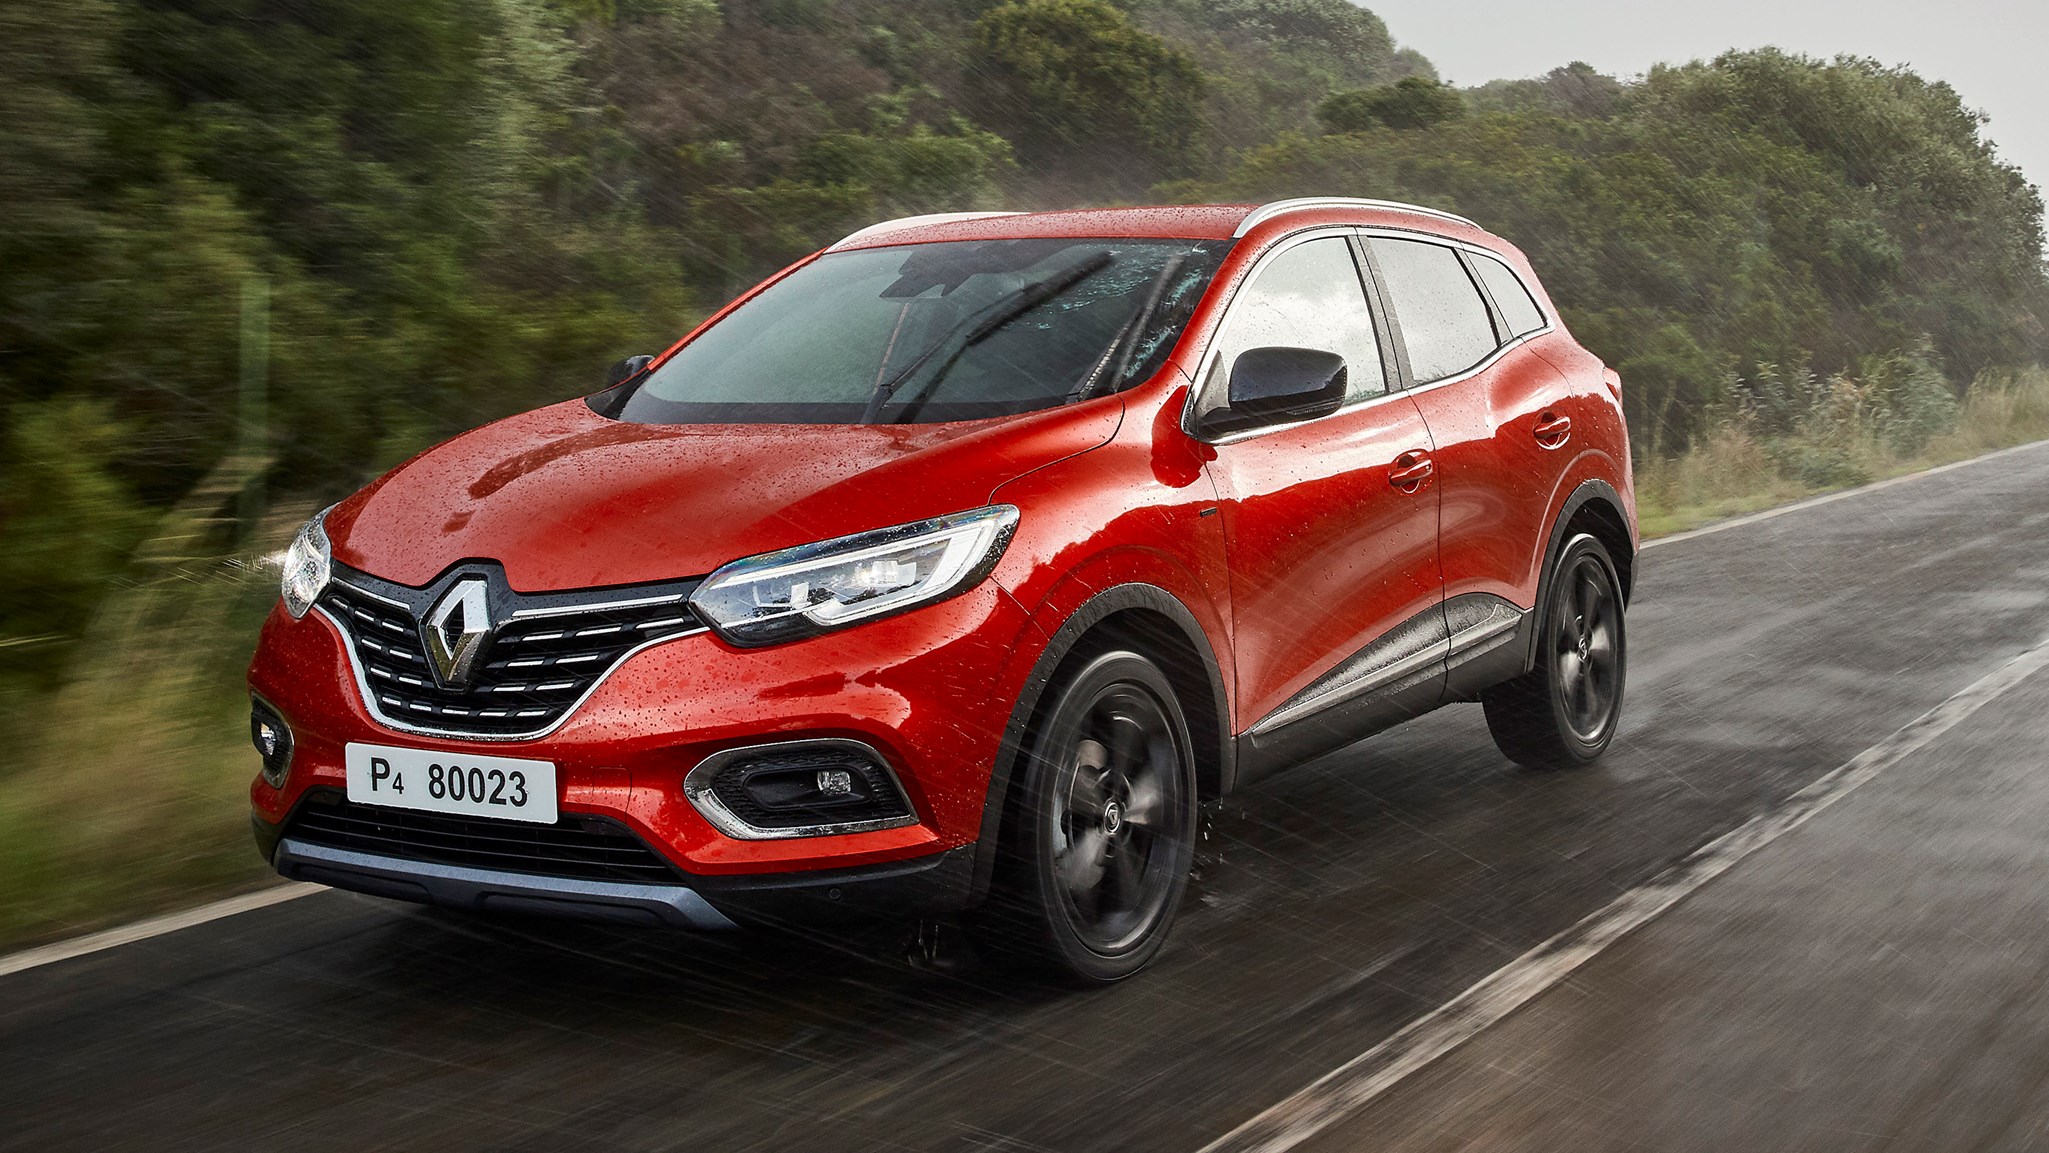 Renault Kadjar Suv 19 Review Blink And You Ll Miss It Car Magazine